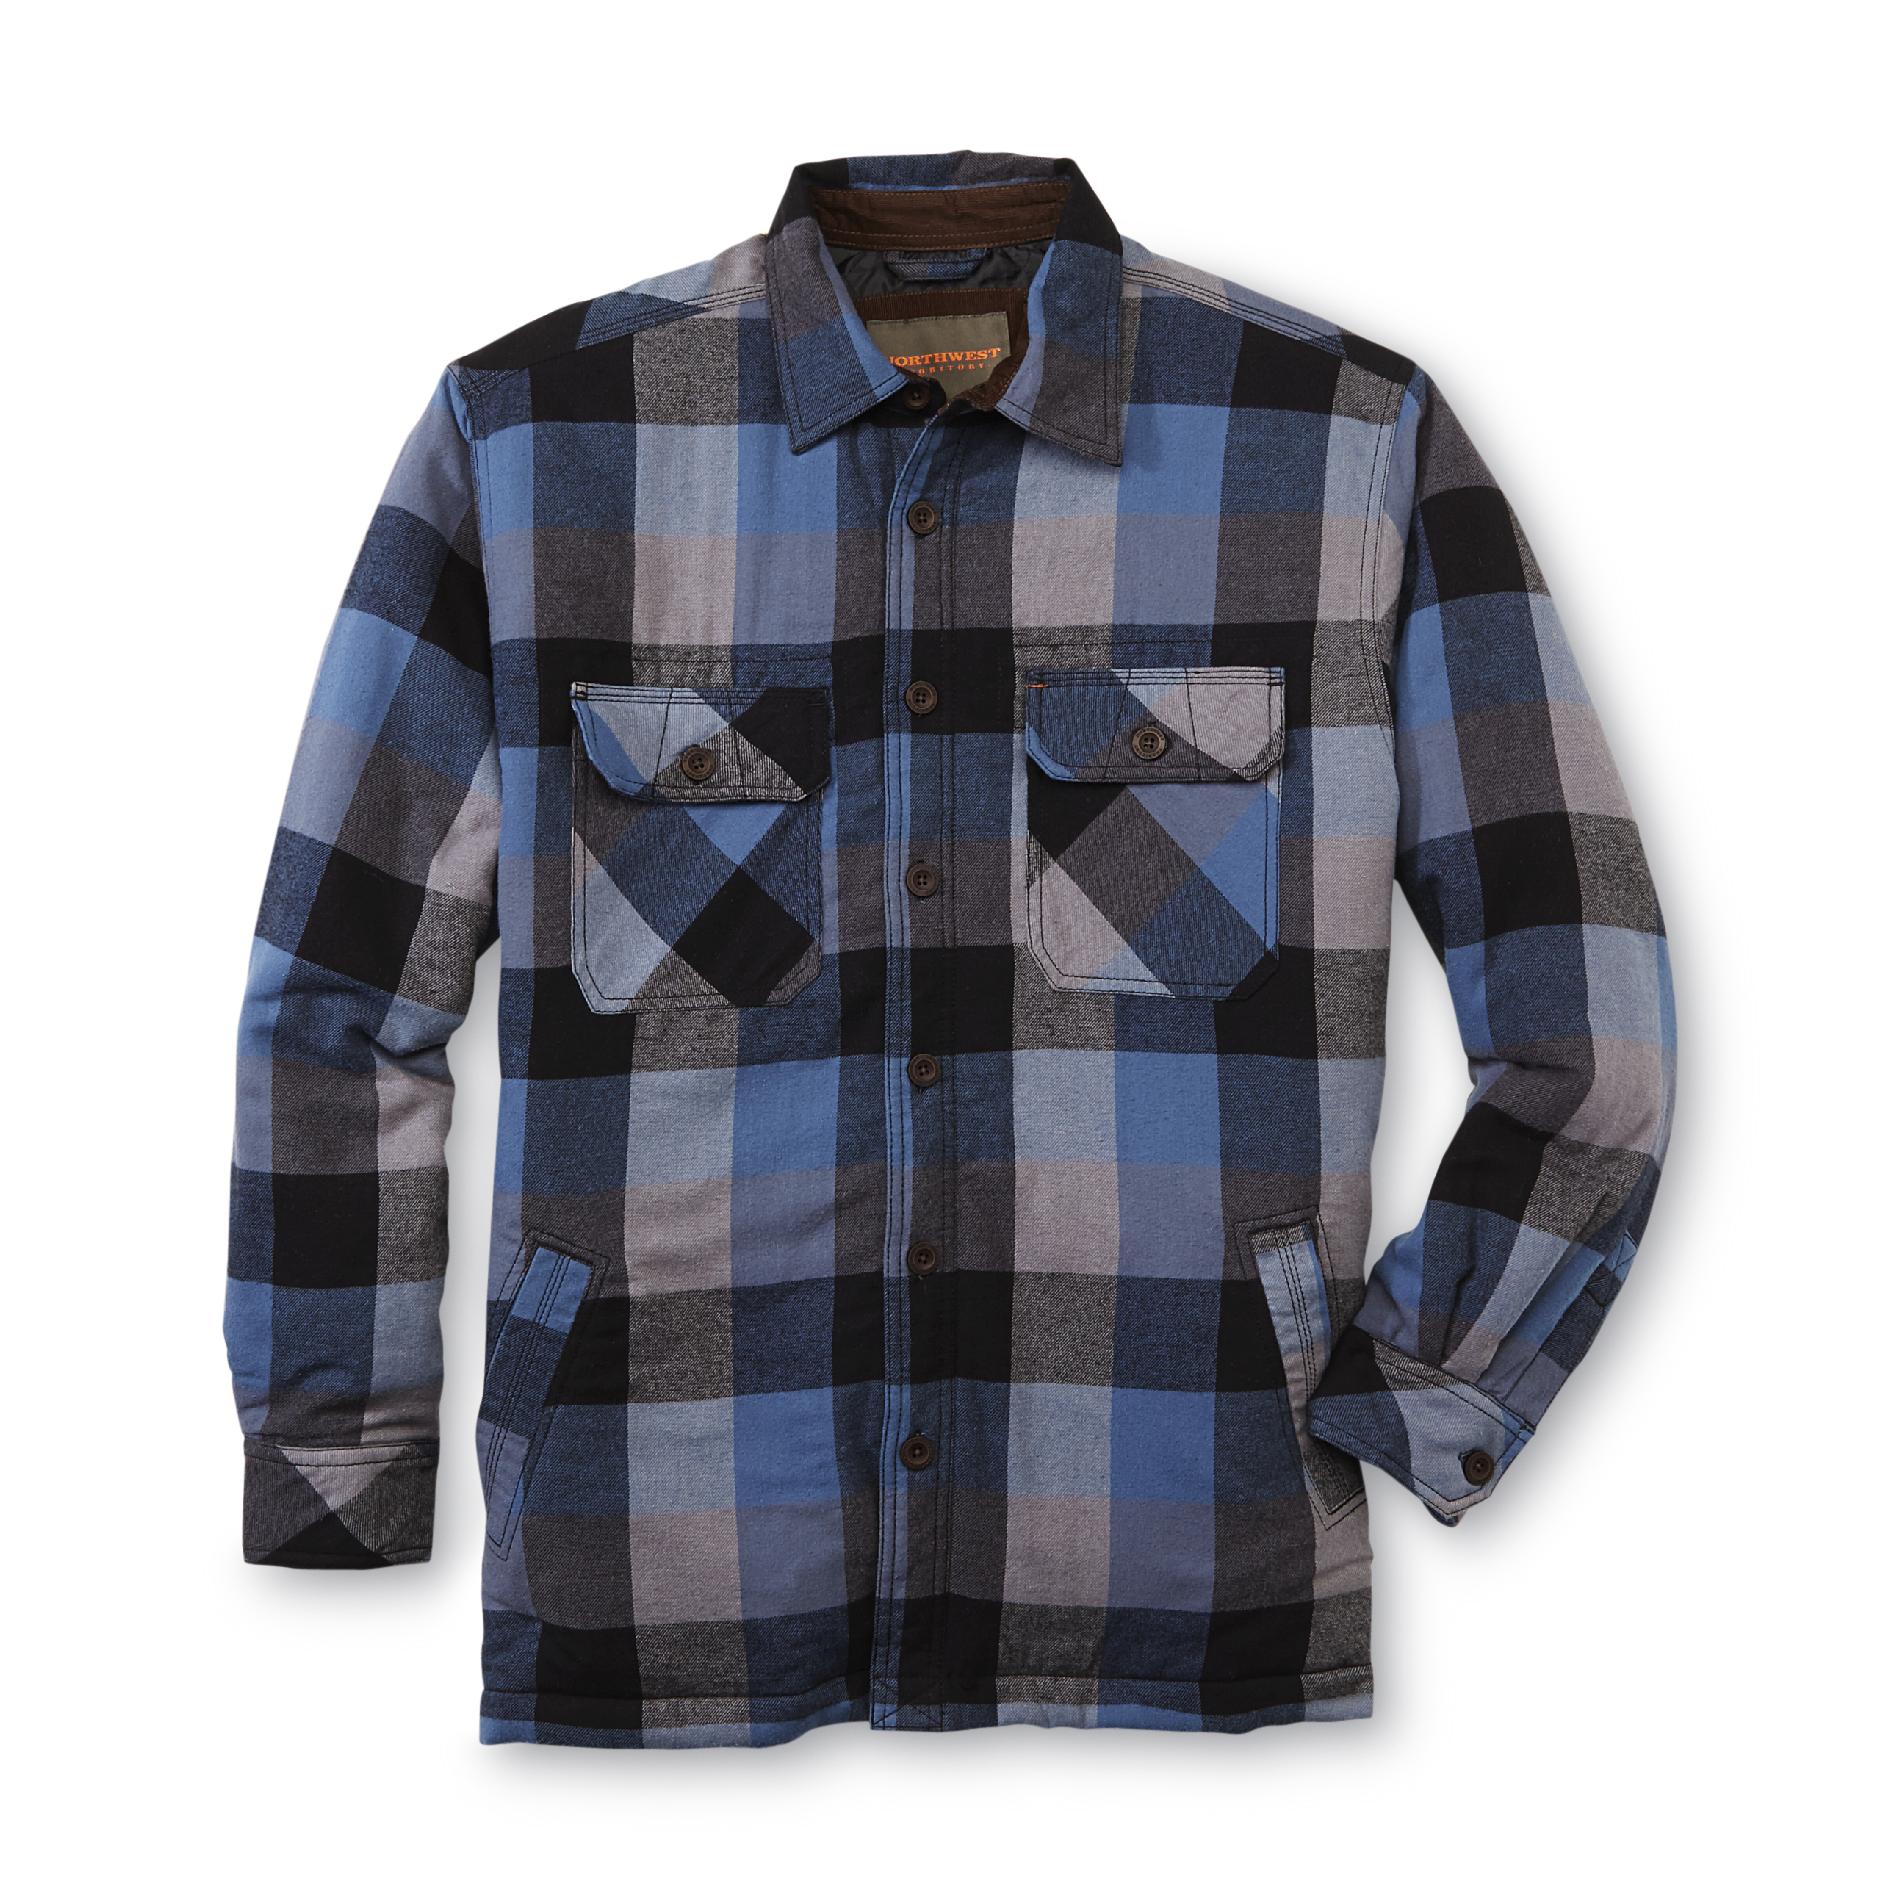 Northwest Territory Men's Quilted Flannel Shirt Jacket - Plaid